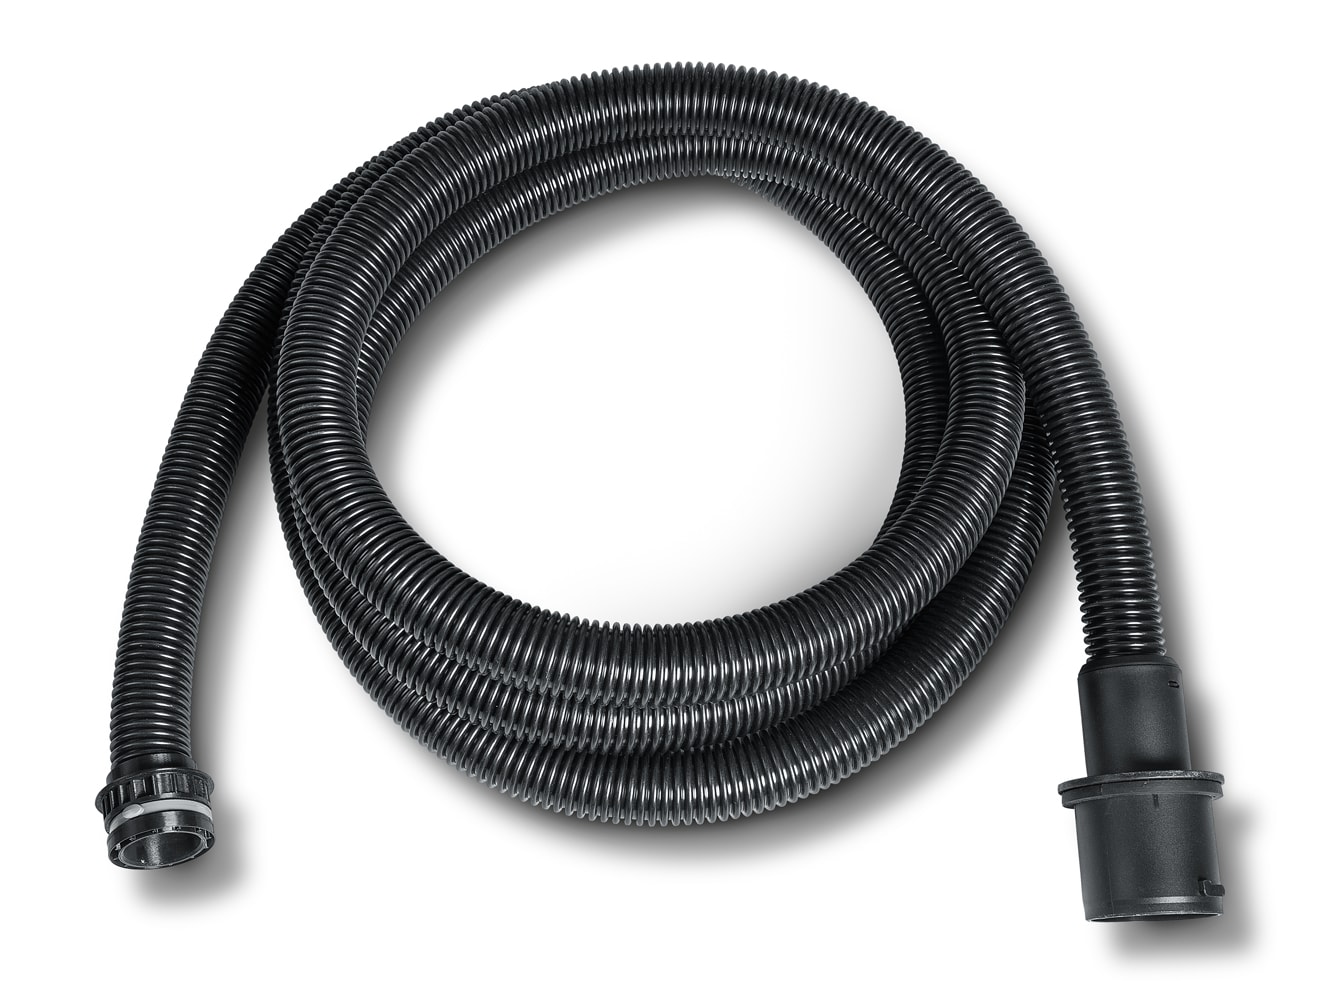 Shop-Vac 1 1/4 Black Hose 6' Long for Canister Vacuum Cleaner. Replaces  90512